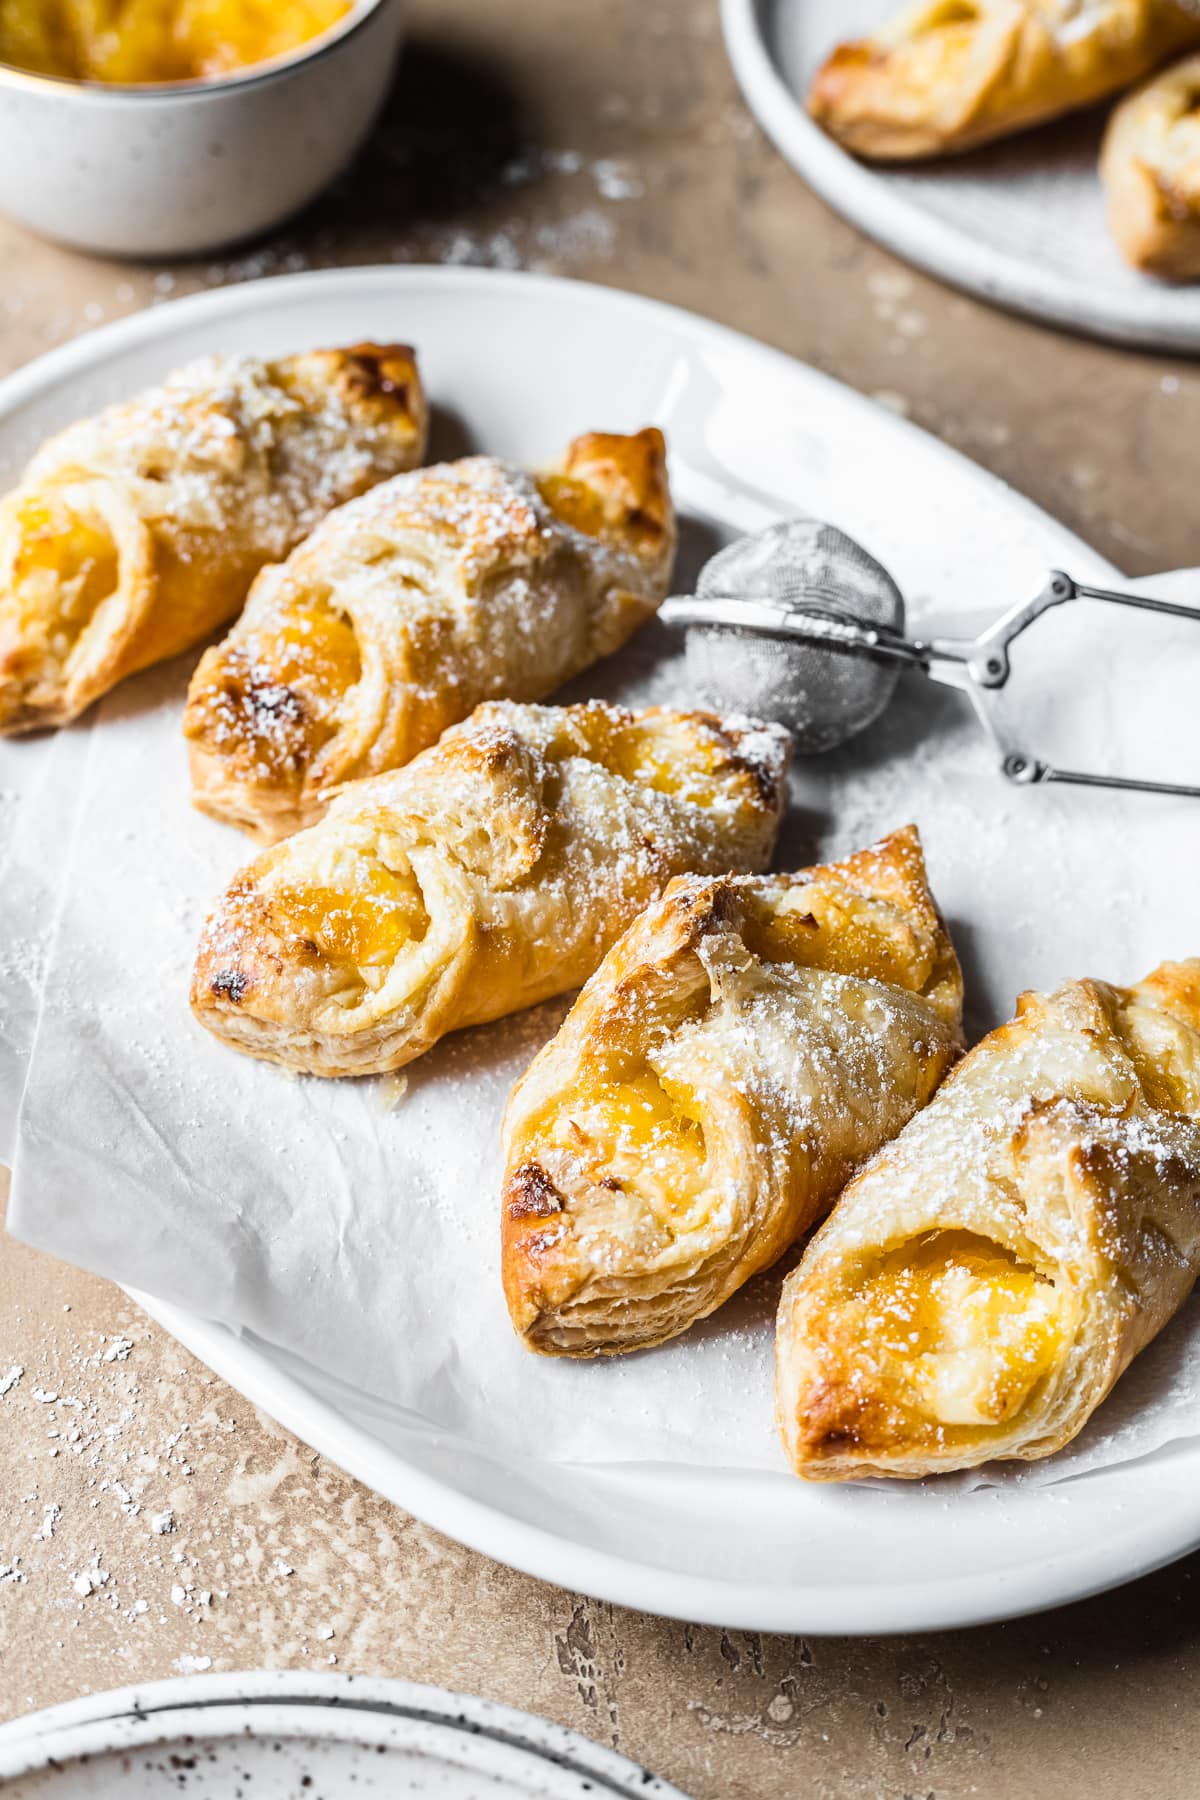 Five golden brown quesitos on white parchment on a white ceramic plate on a tan stone surface. A small metal sieve of powdered sugar rests on the right of the plate. A small bowl of pineapple jam and a small plate with more pastries peek into the frame at top.